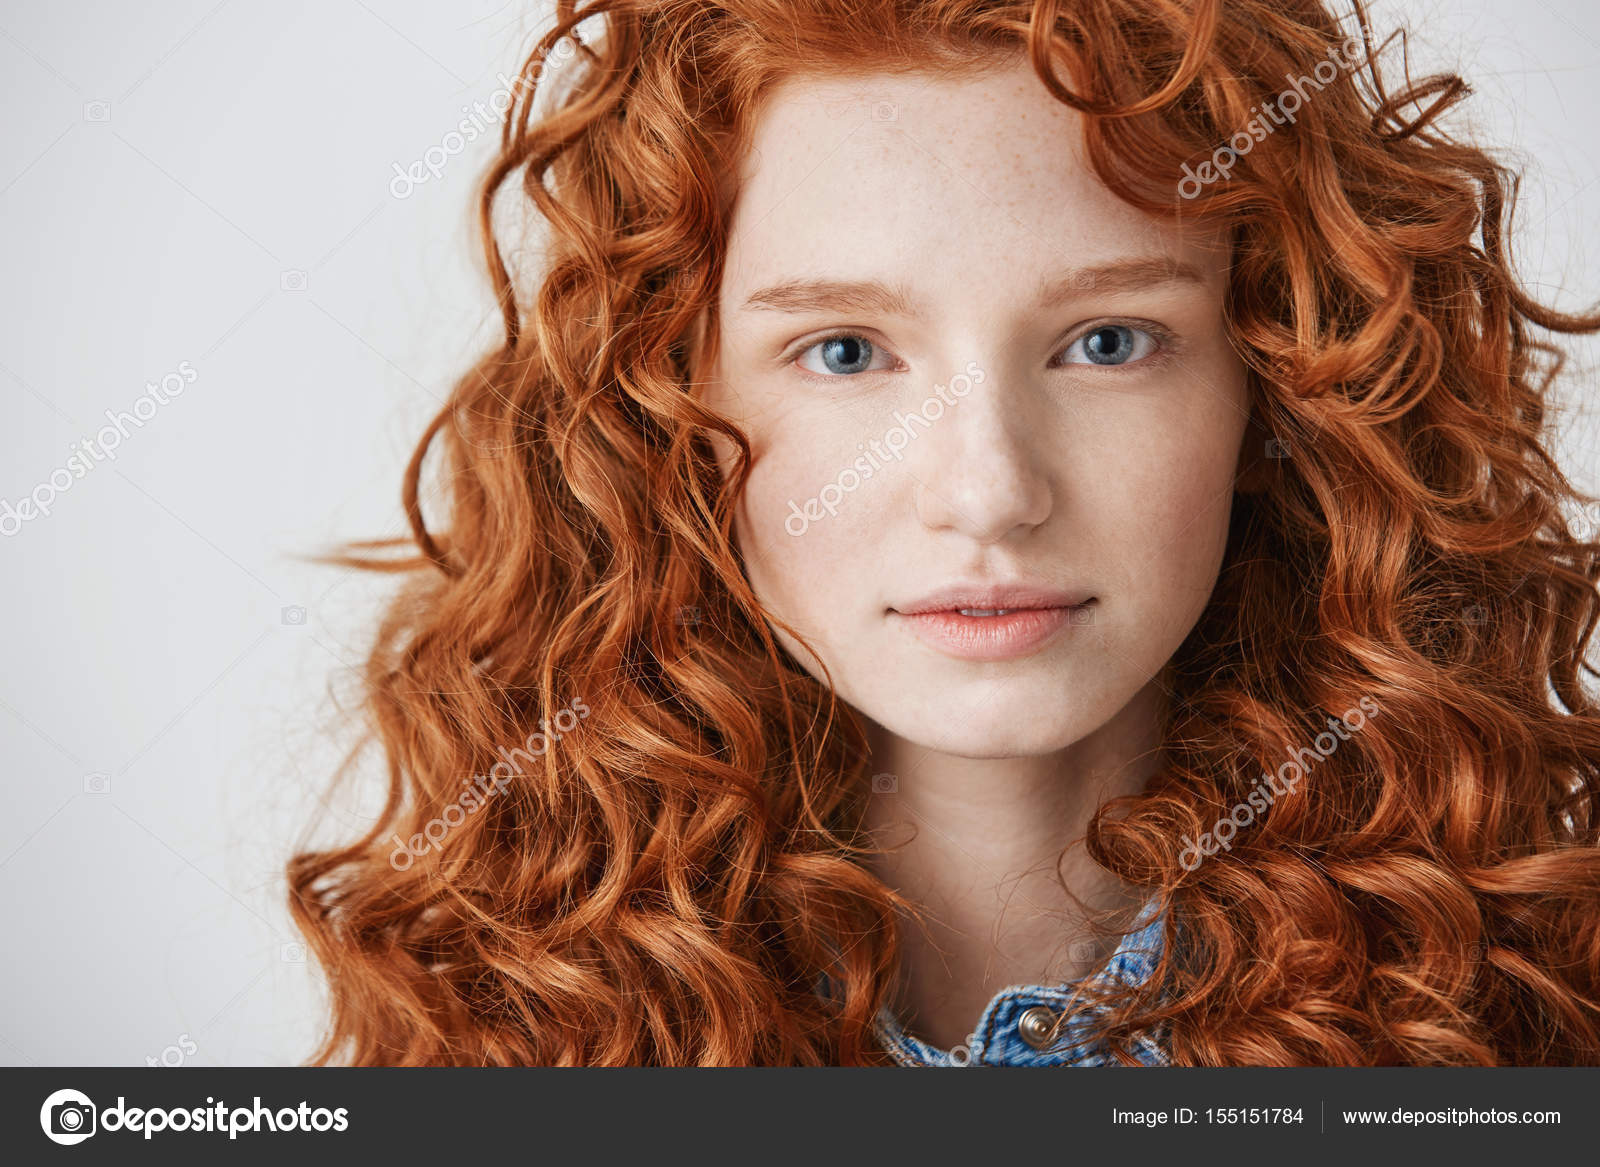 Natural curly red hair